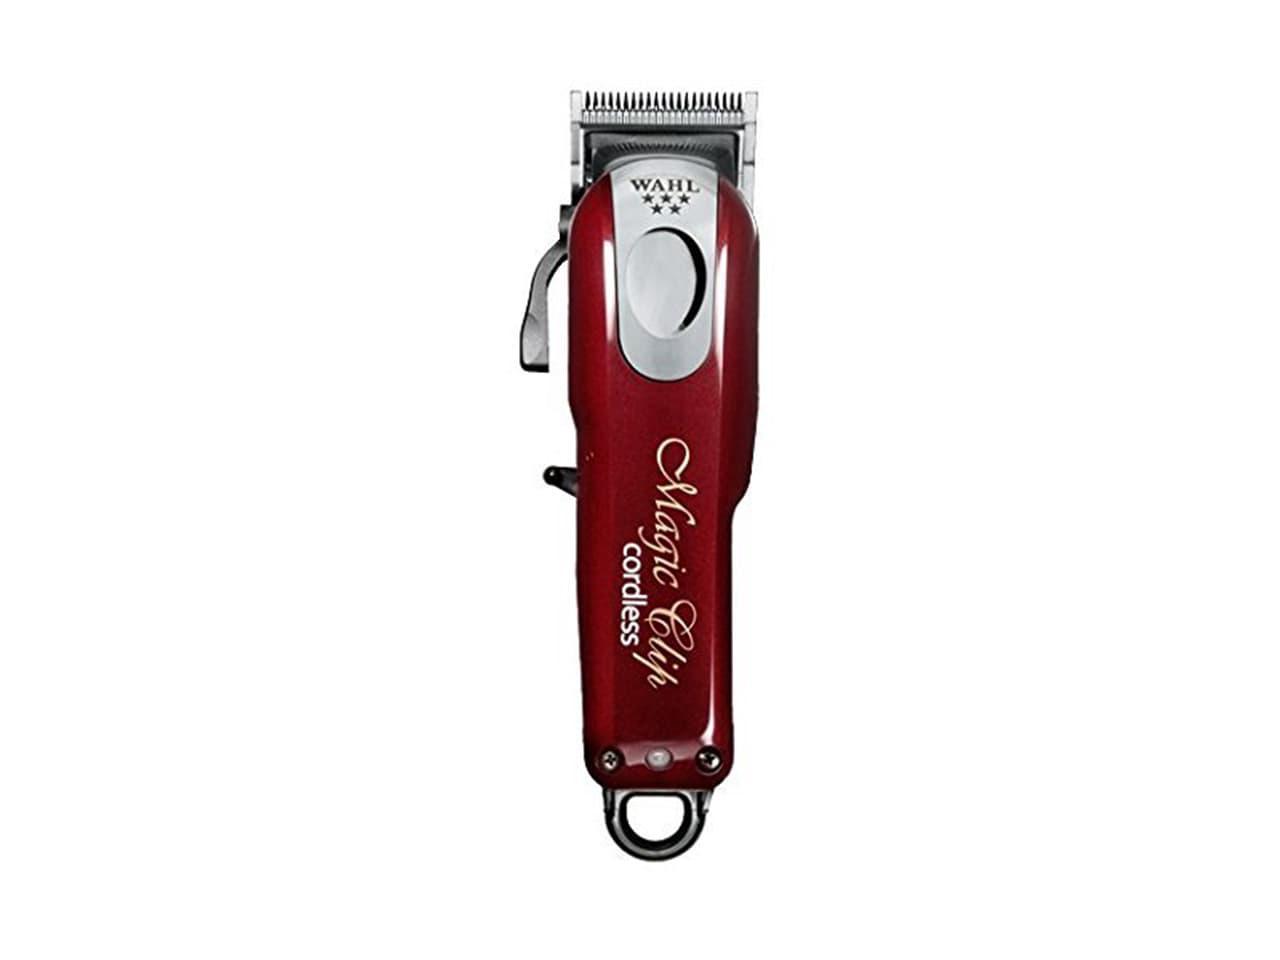 wahl hair clipper price game